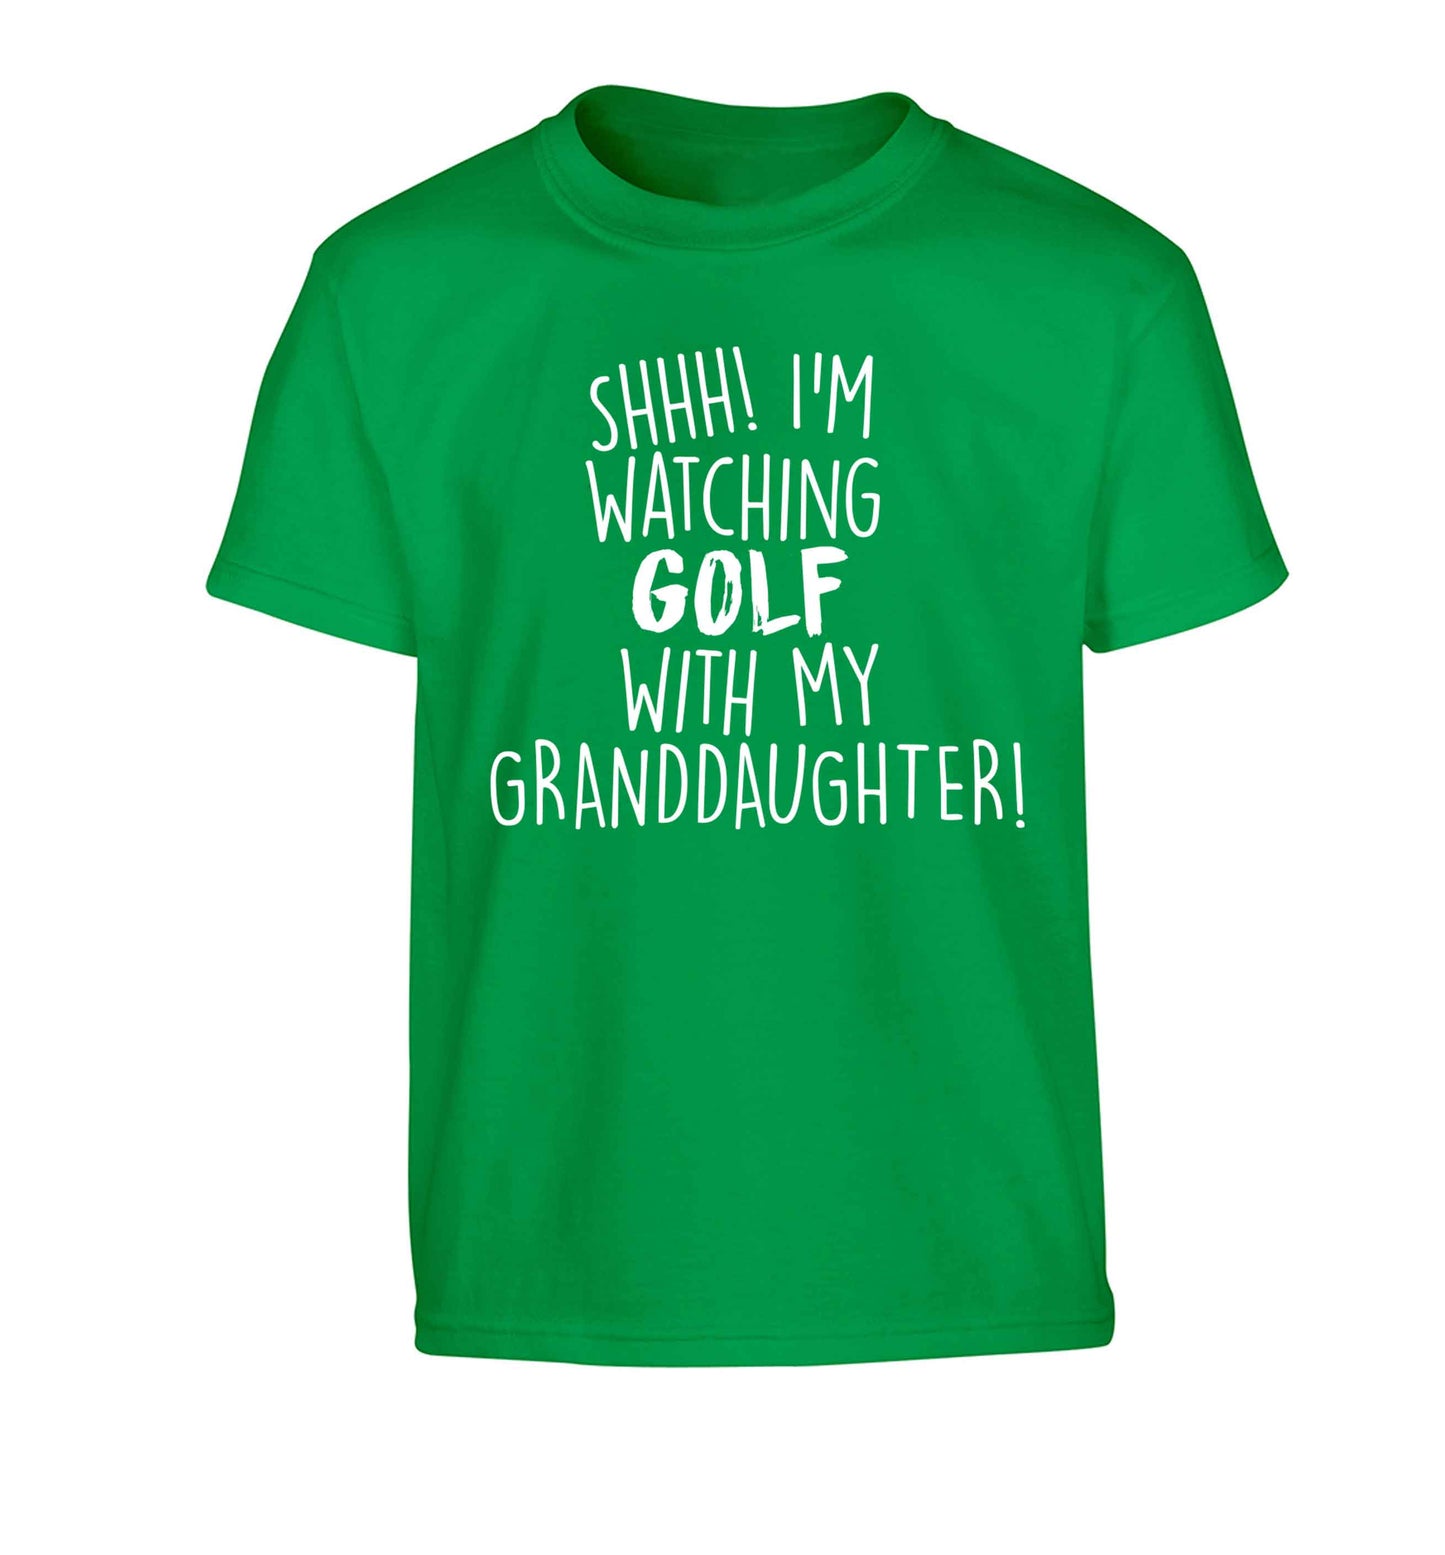 Shh I'm watching golf with my granddaughter Children's green Tshirt 12-13 Years